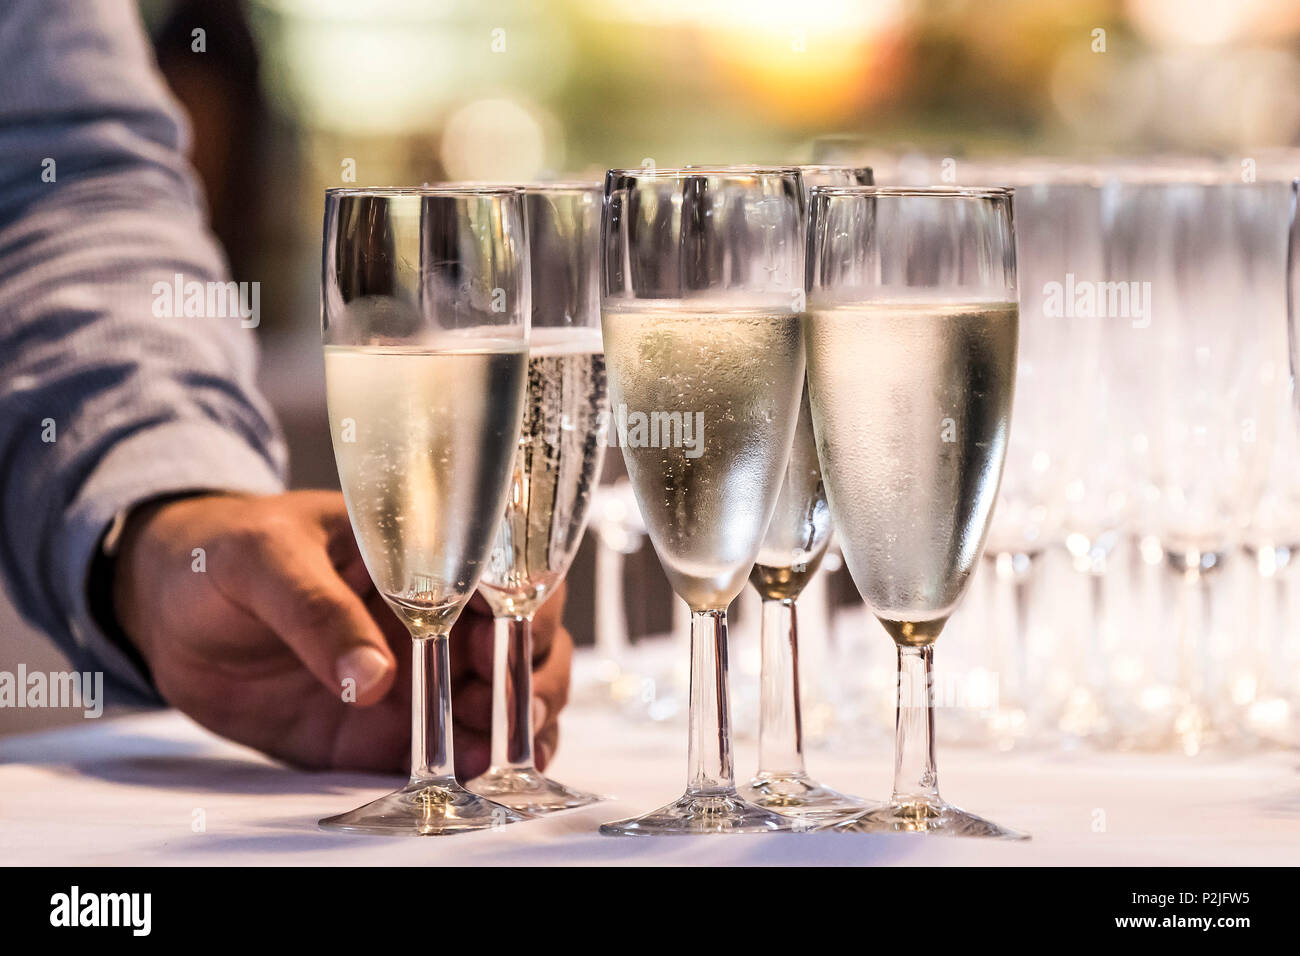 A hand taking a glass of Prosecco. Stock Photo